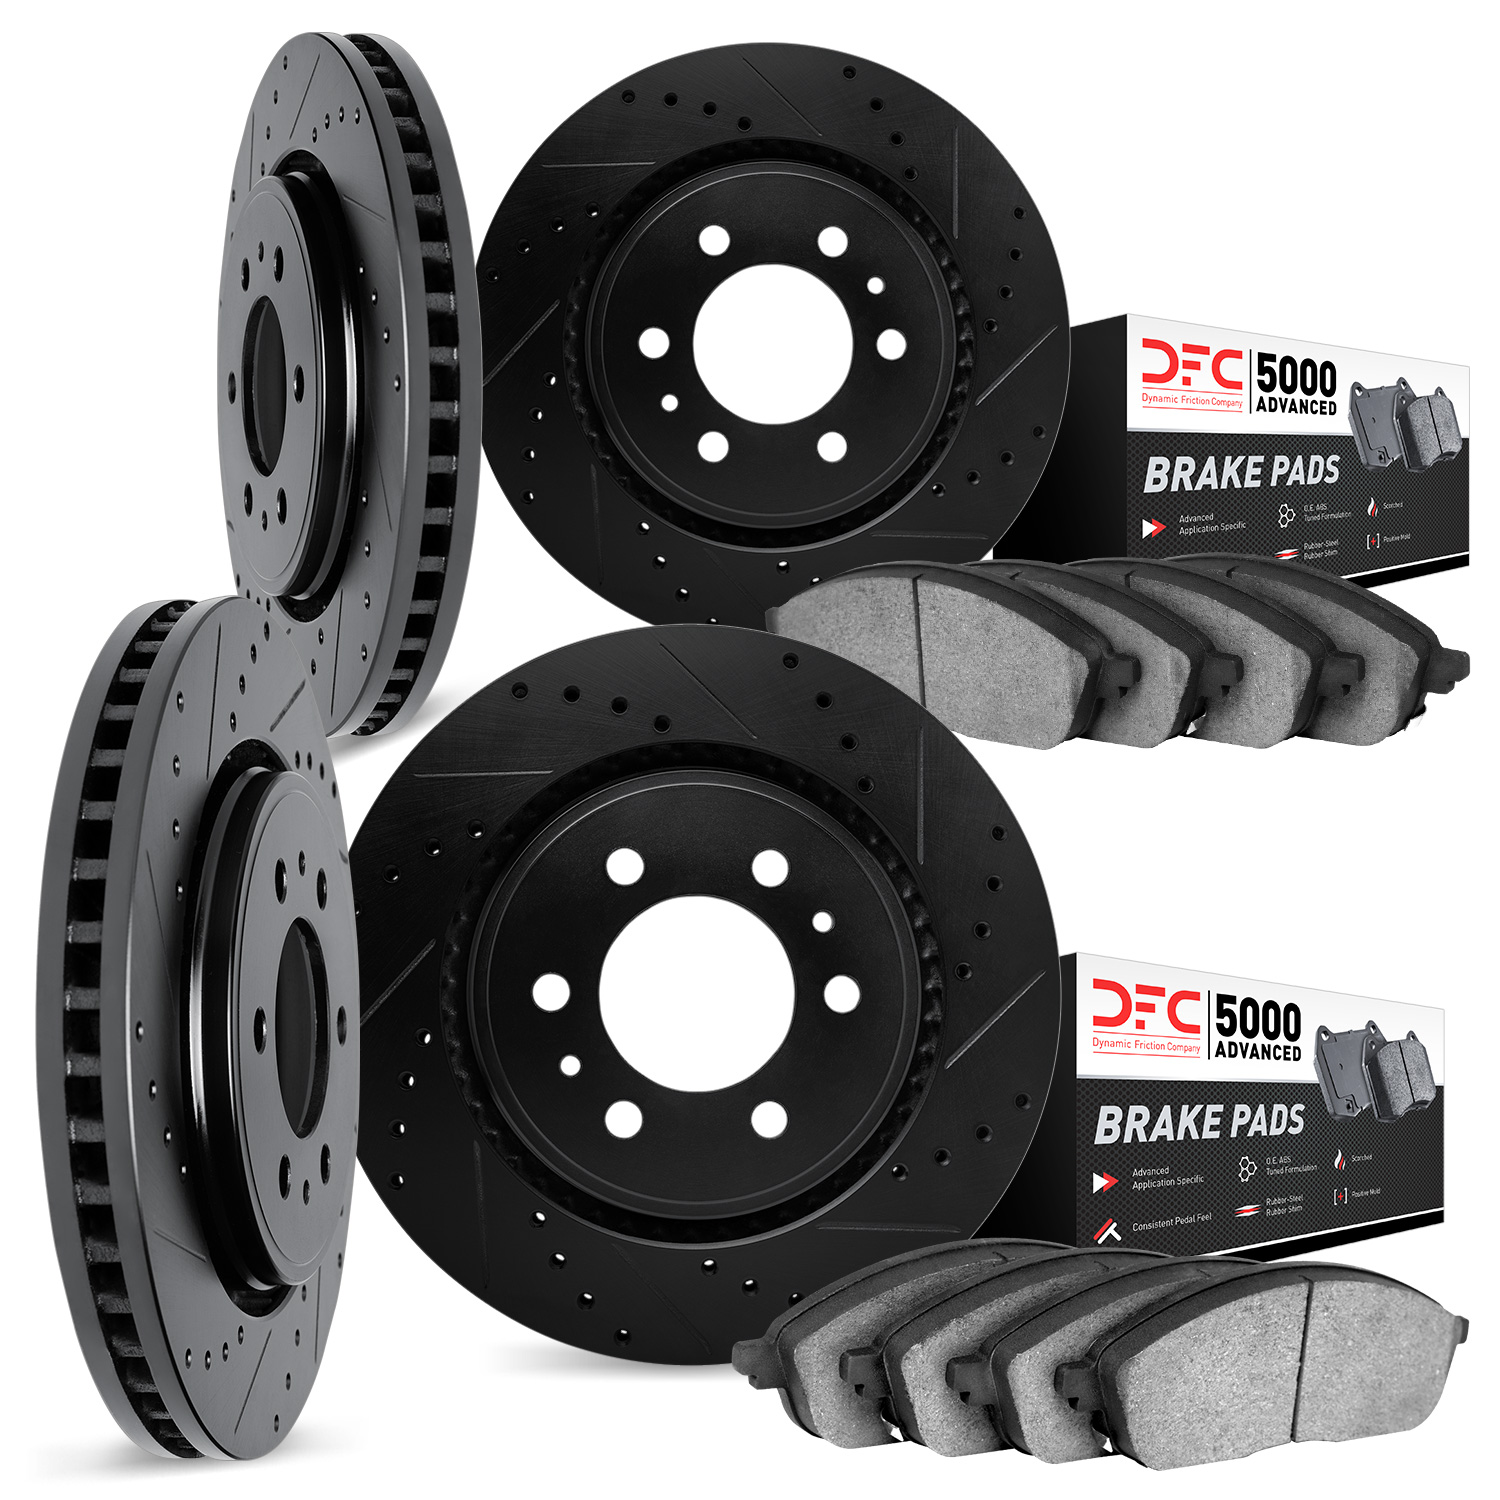 8504-67113 Drilled/Slotted Brake Rotors w/5000 Advanced Brake Pads Kit [Black], 2008-2011 Infiniti/Nissan, Position: Front and R